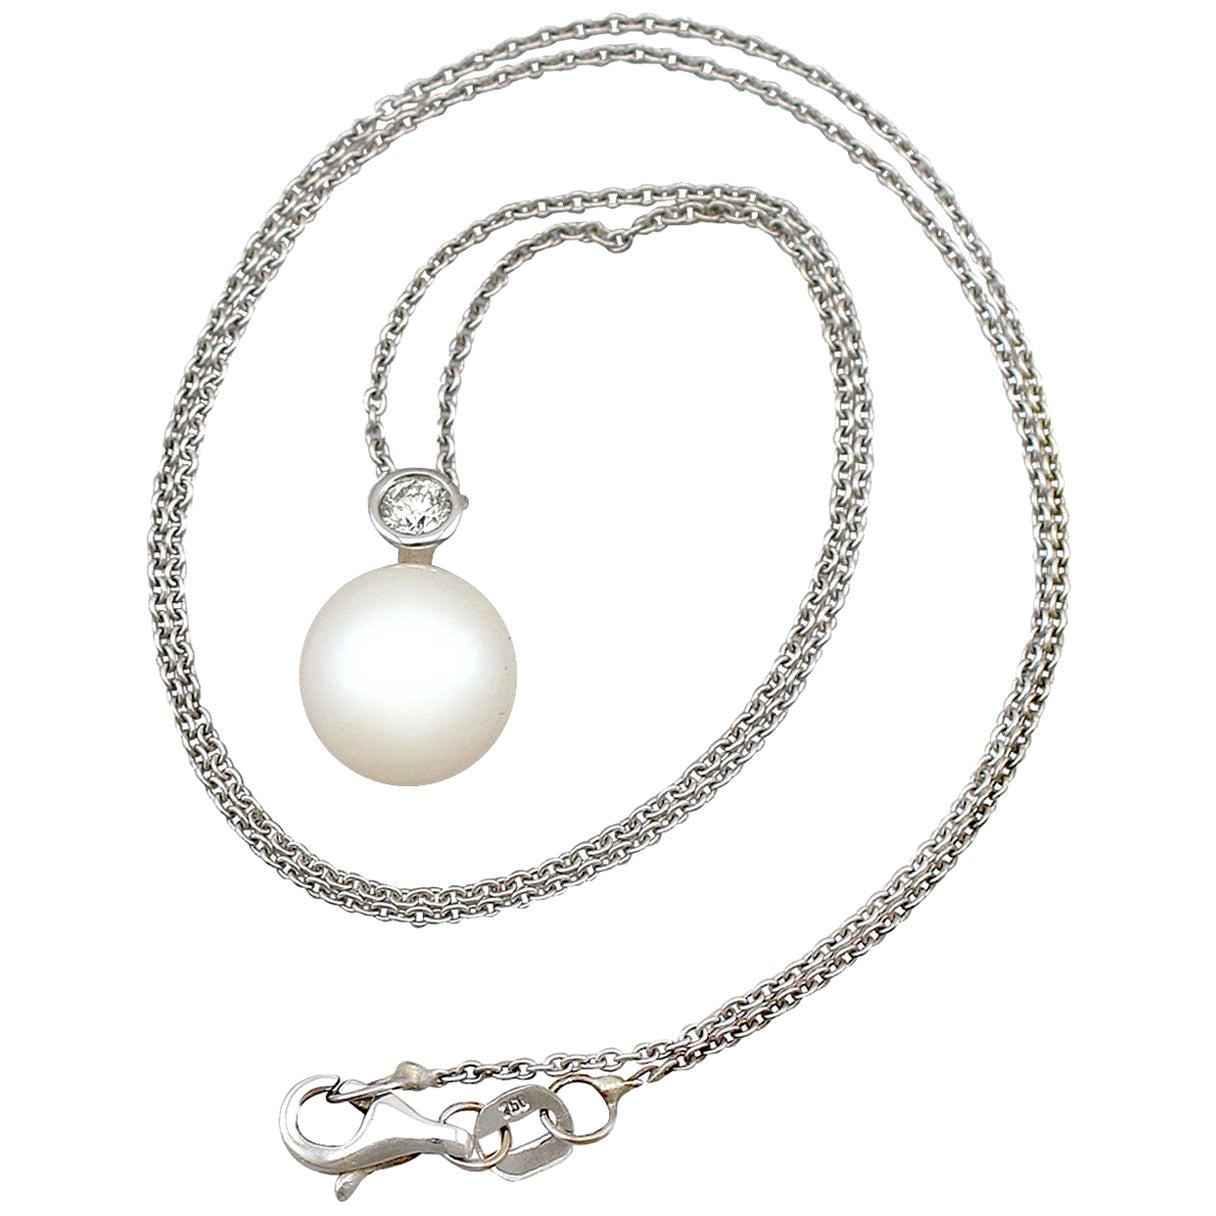 An impressive single cultured pearl and 0.19 carat diamond, 18k white gold necklace; part of our diverse pearl jewelry and estate jewelry collections.

This fine and impressive vintage single pearl pendant has been crafted in 18k white gold.

The